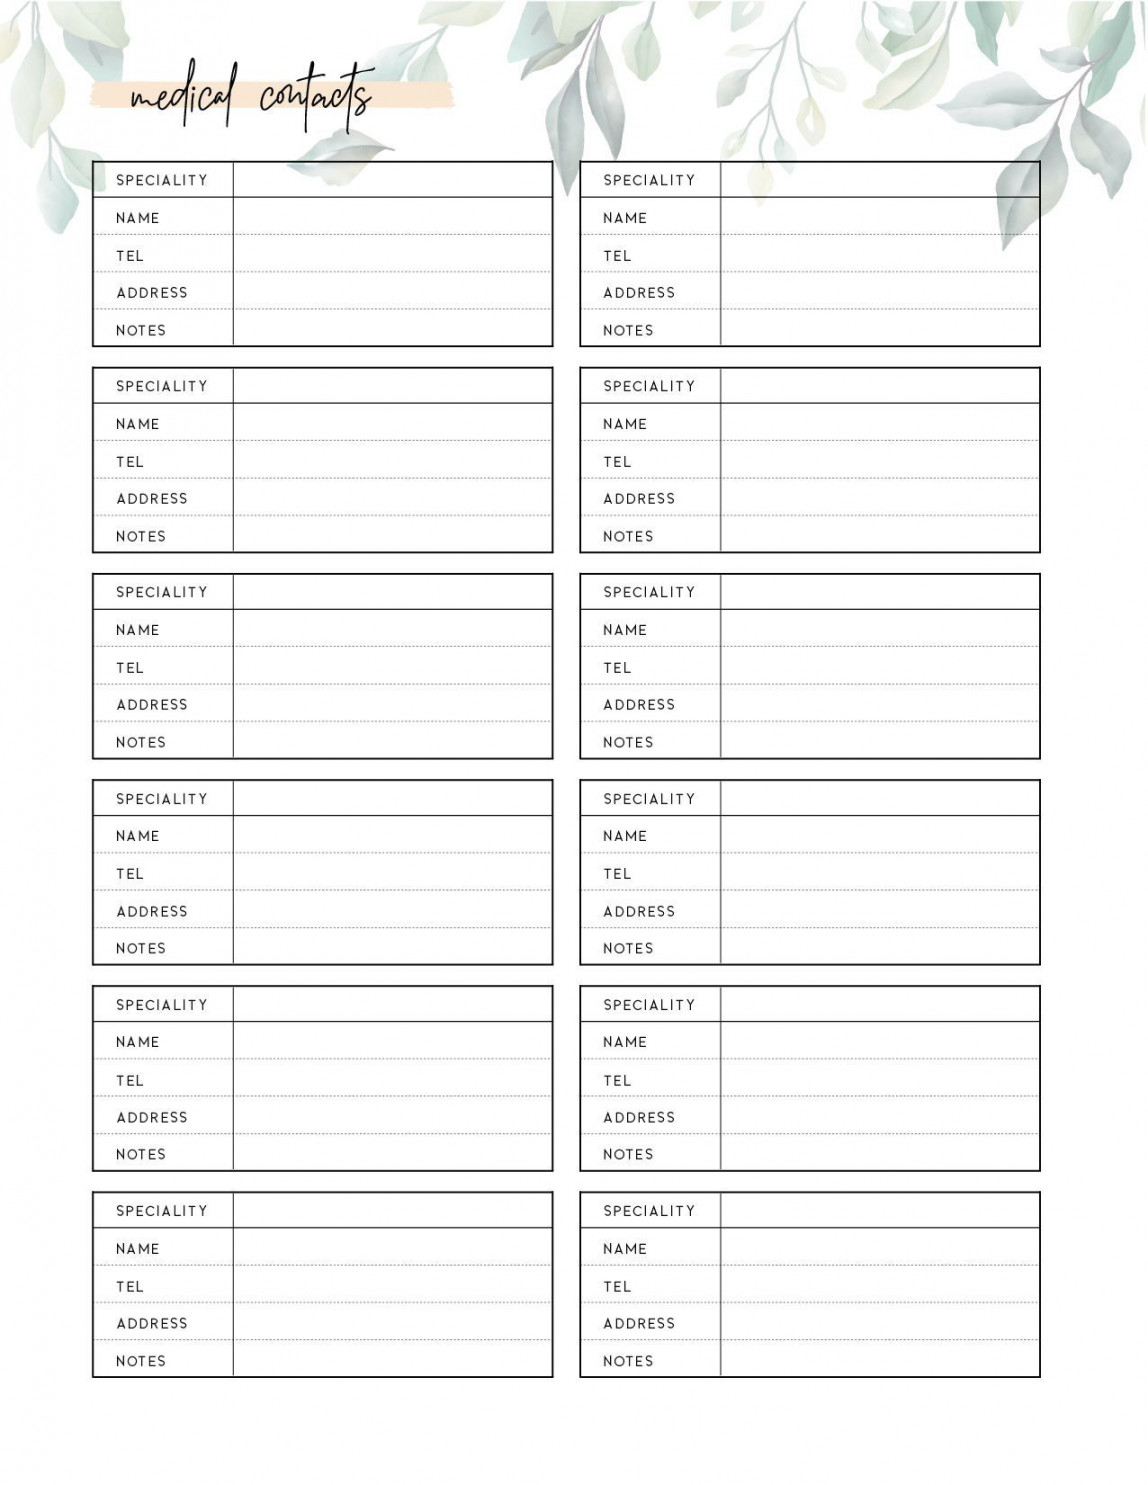 FREE Printable Medical Contact List Template - World of Printables